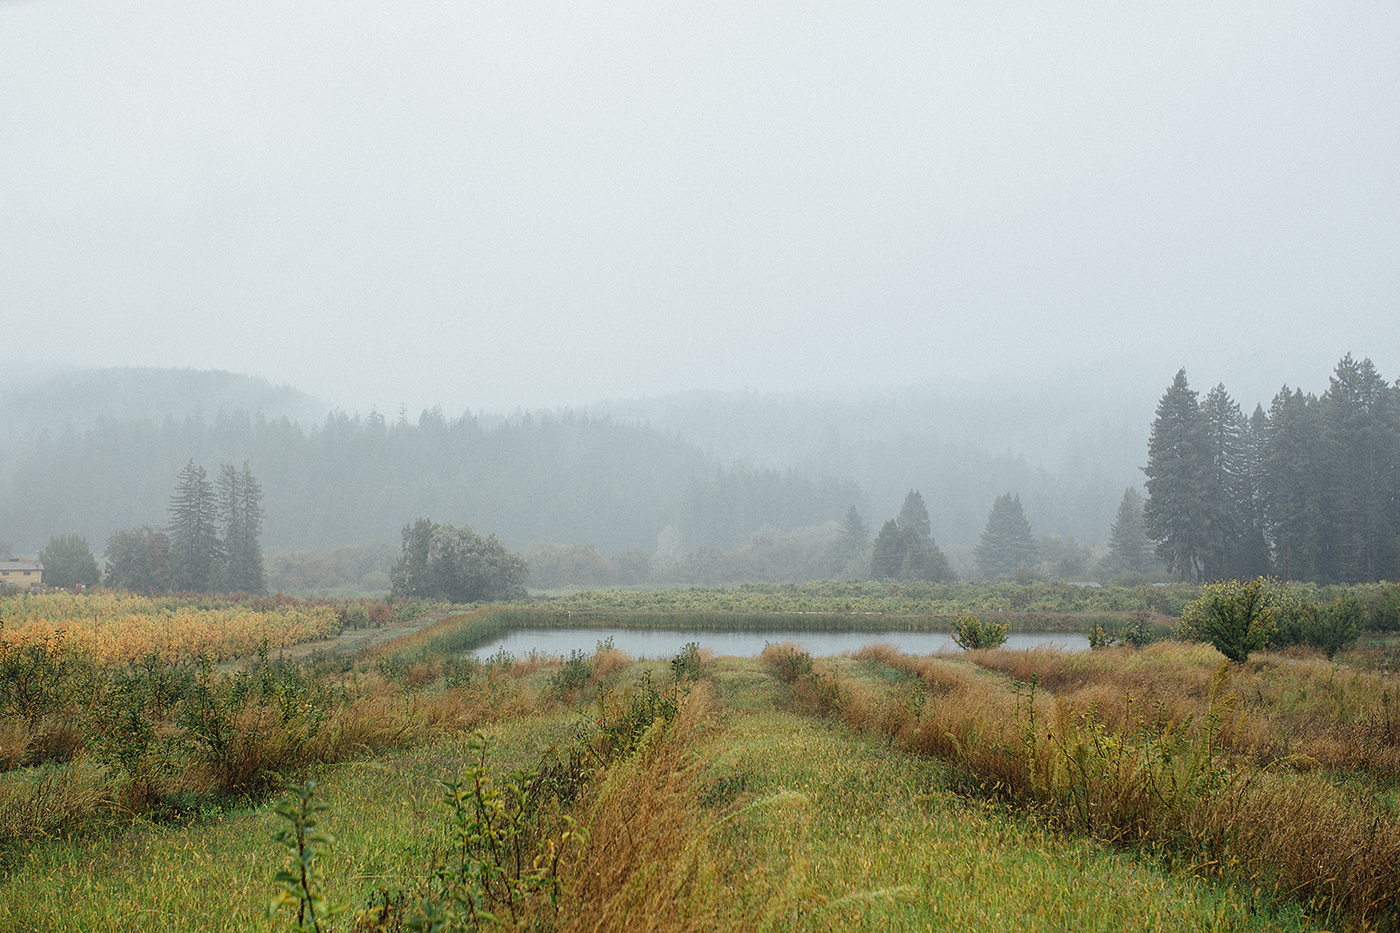 A foggy, rainy day in Mendocino County